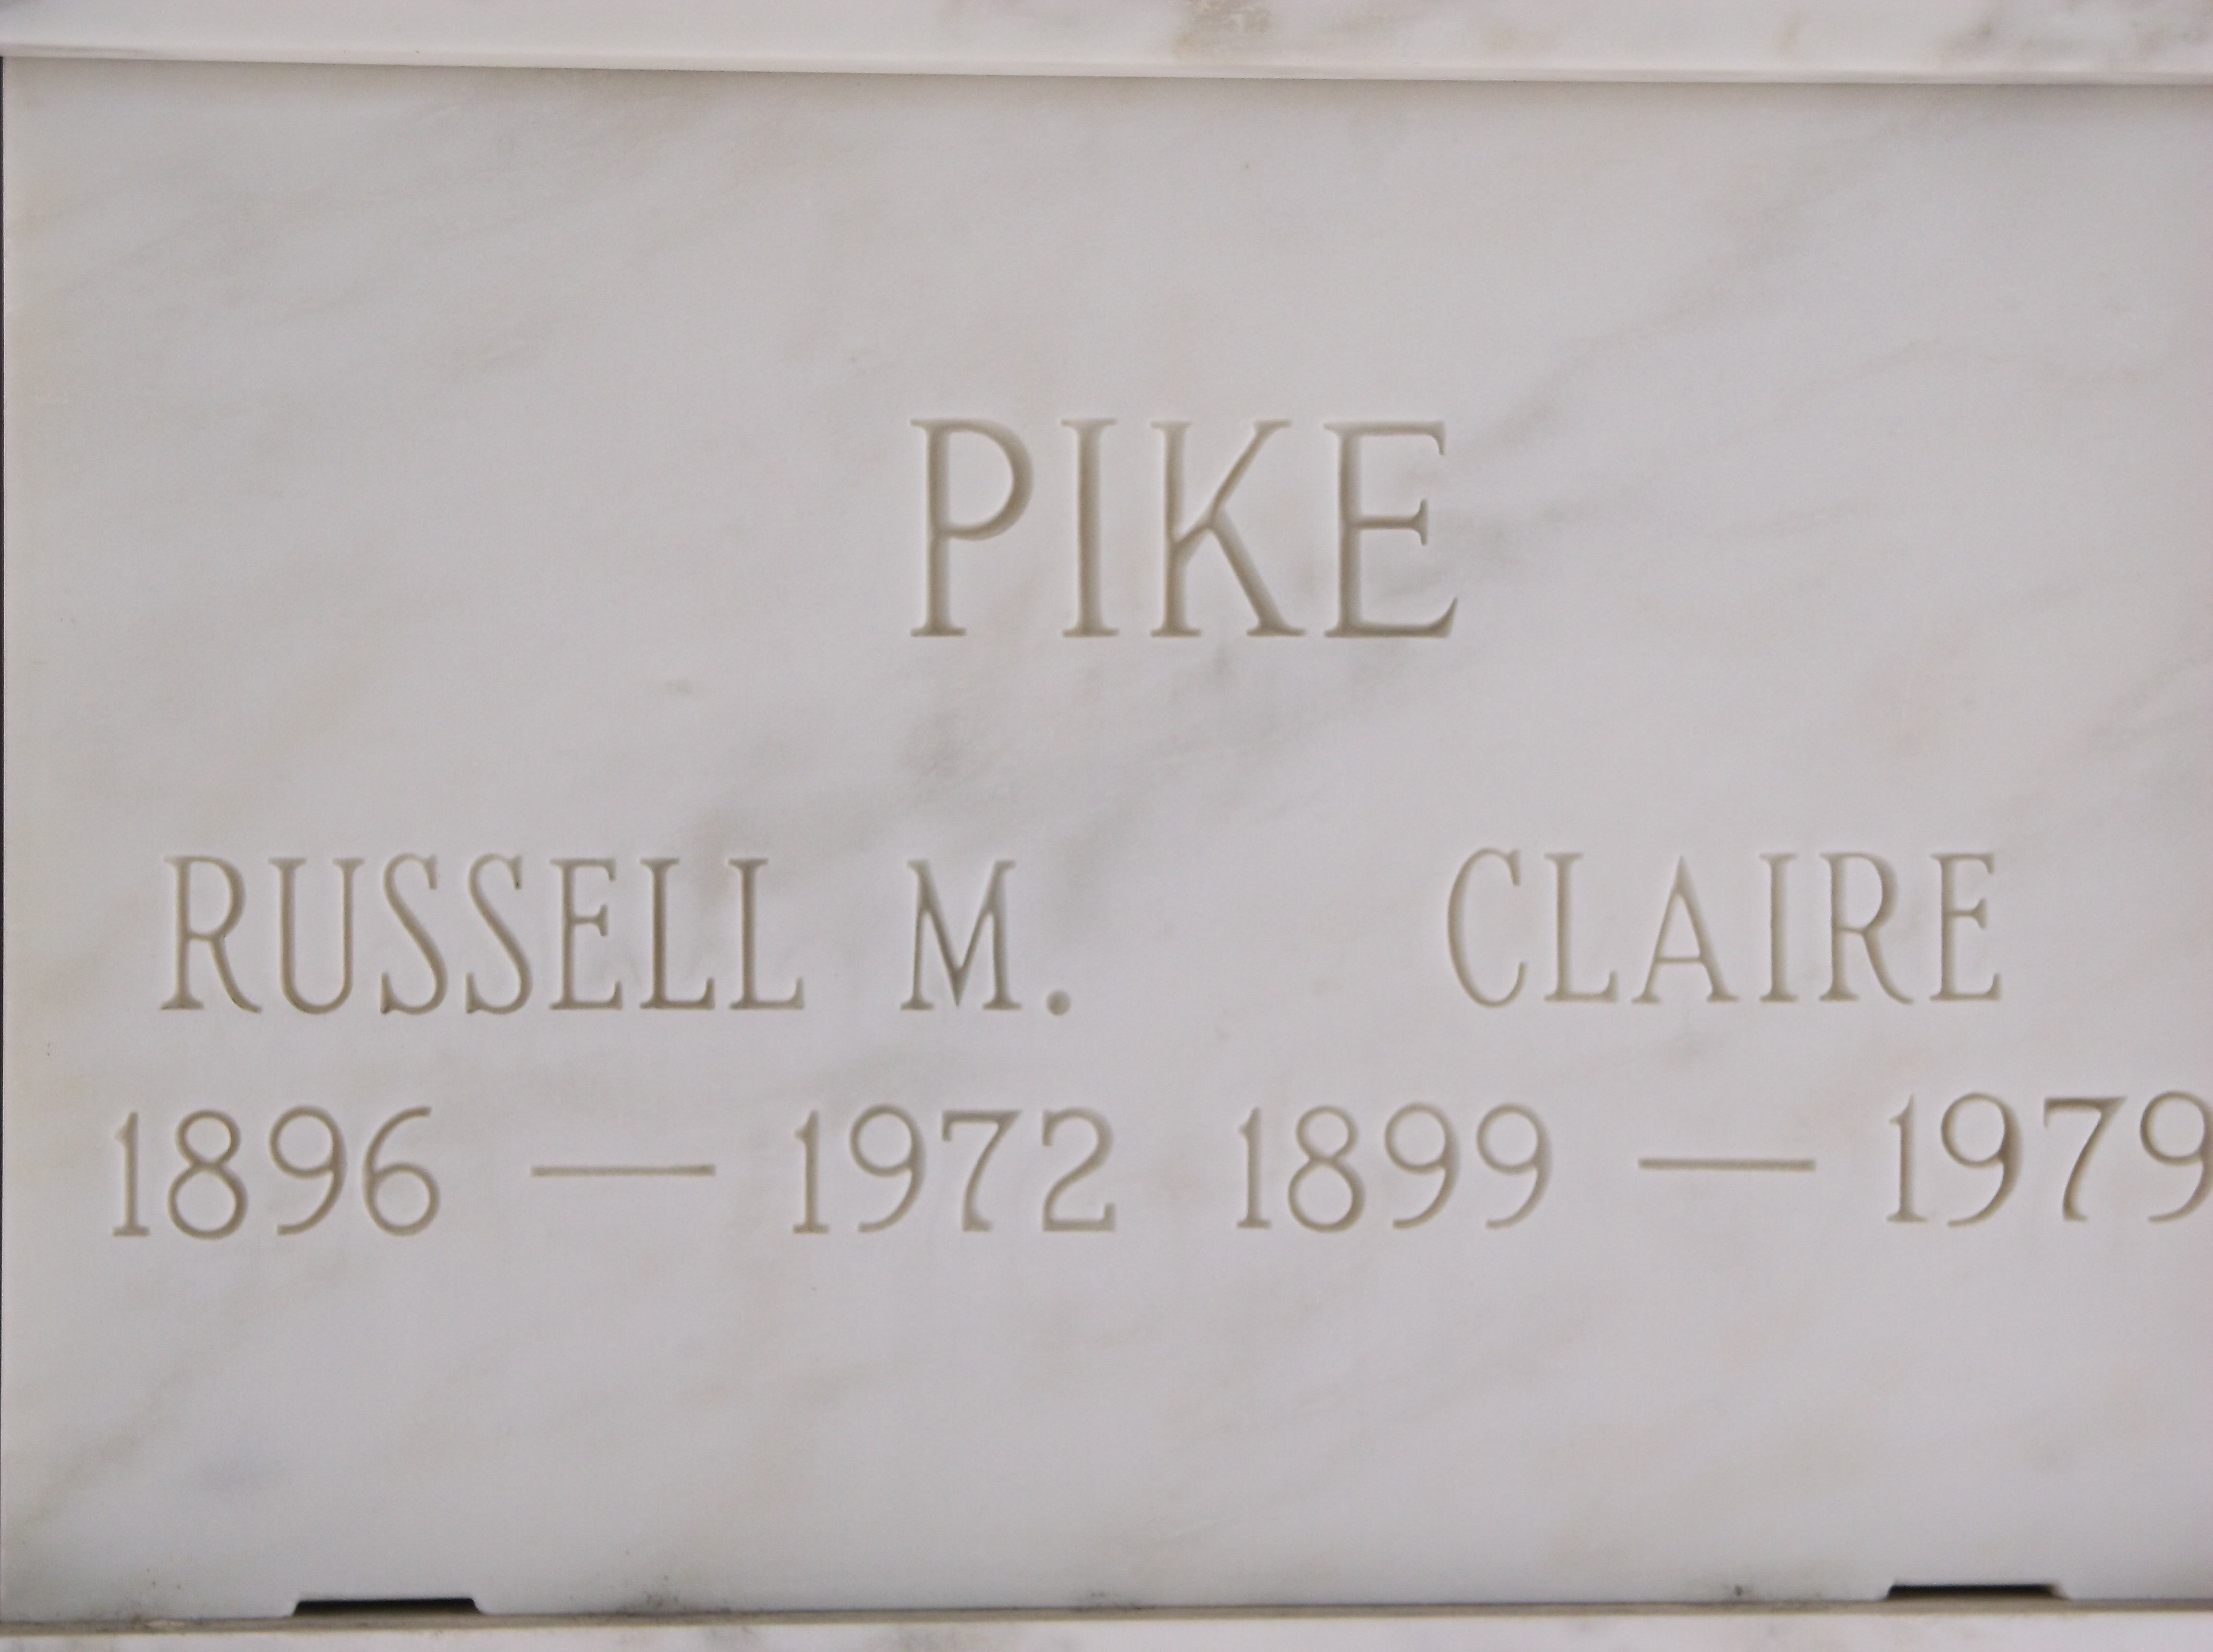 Russell M Pike